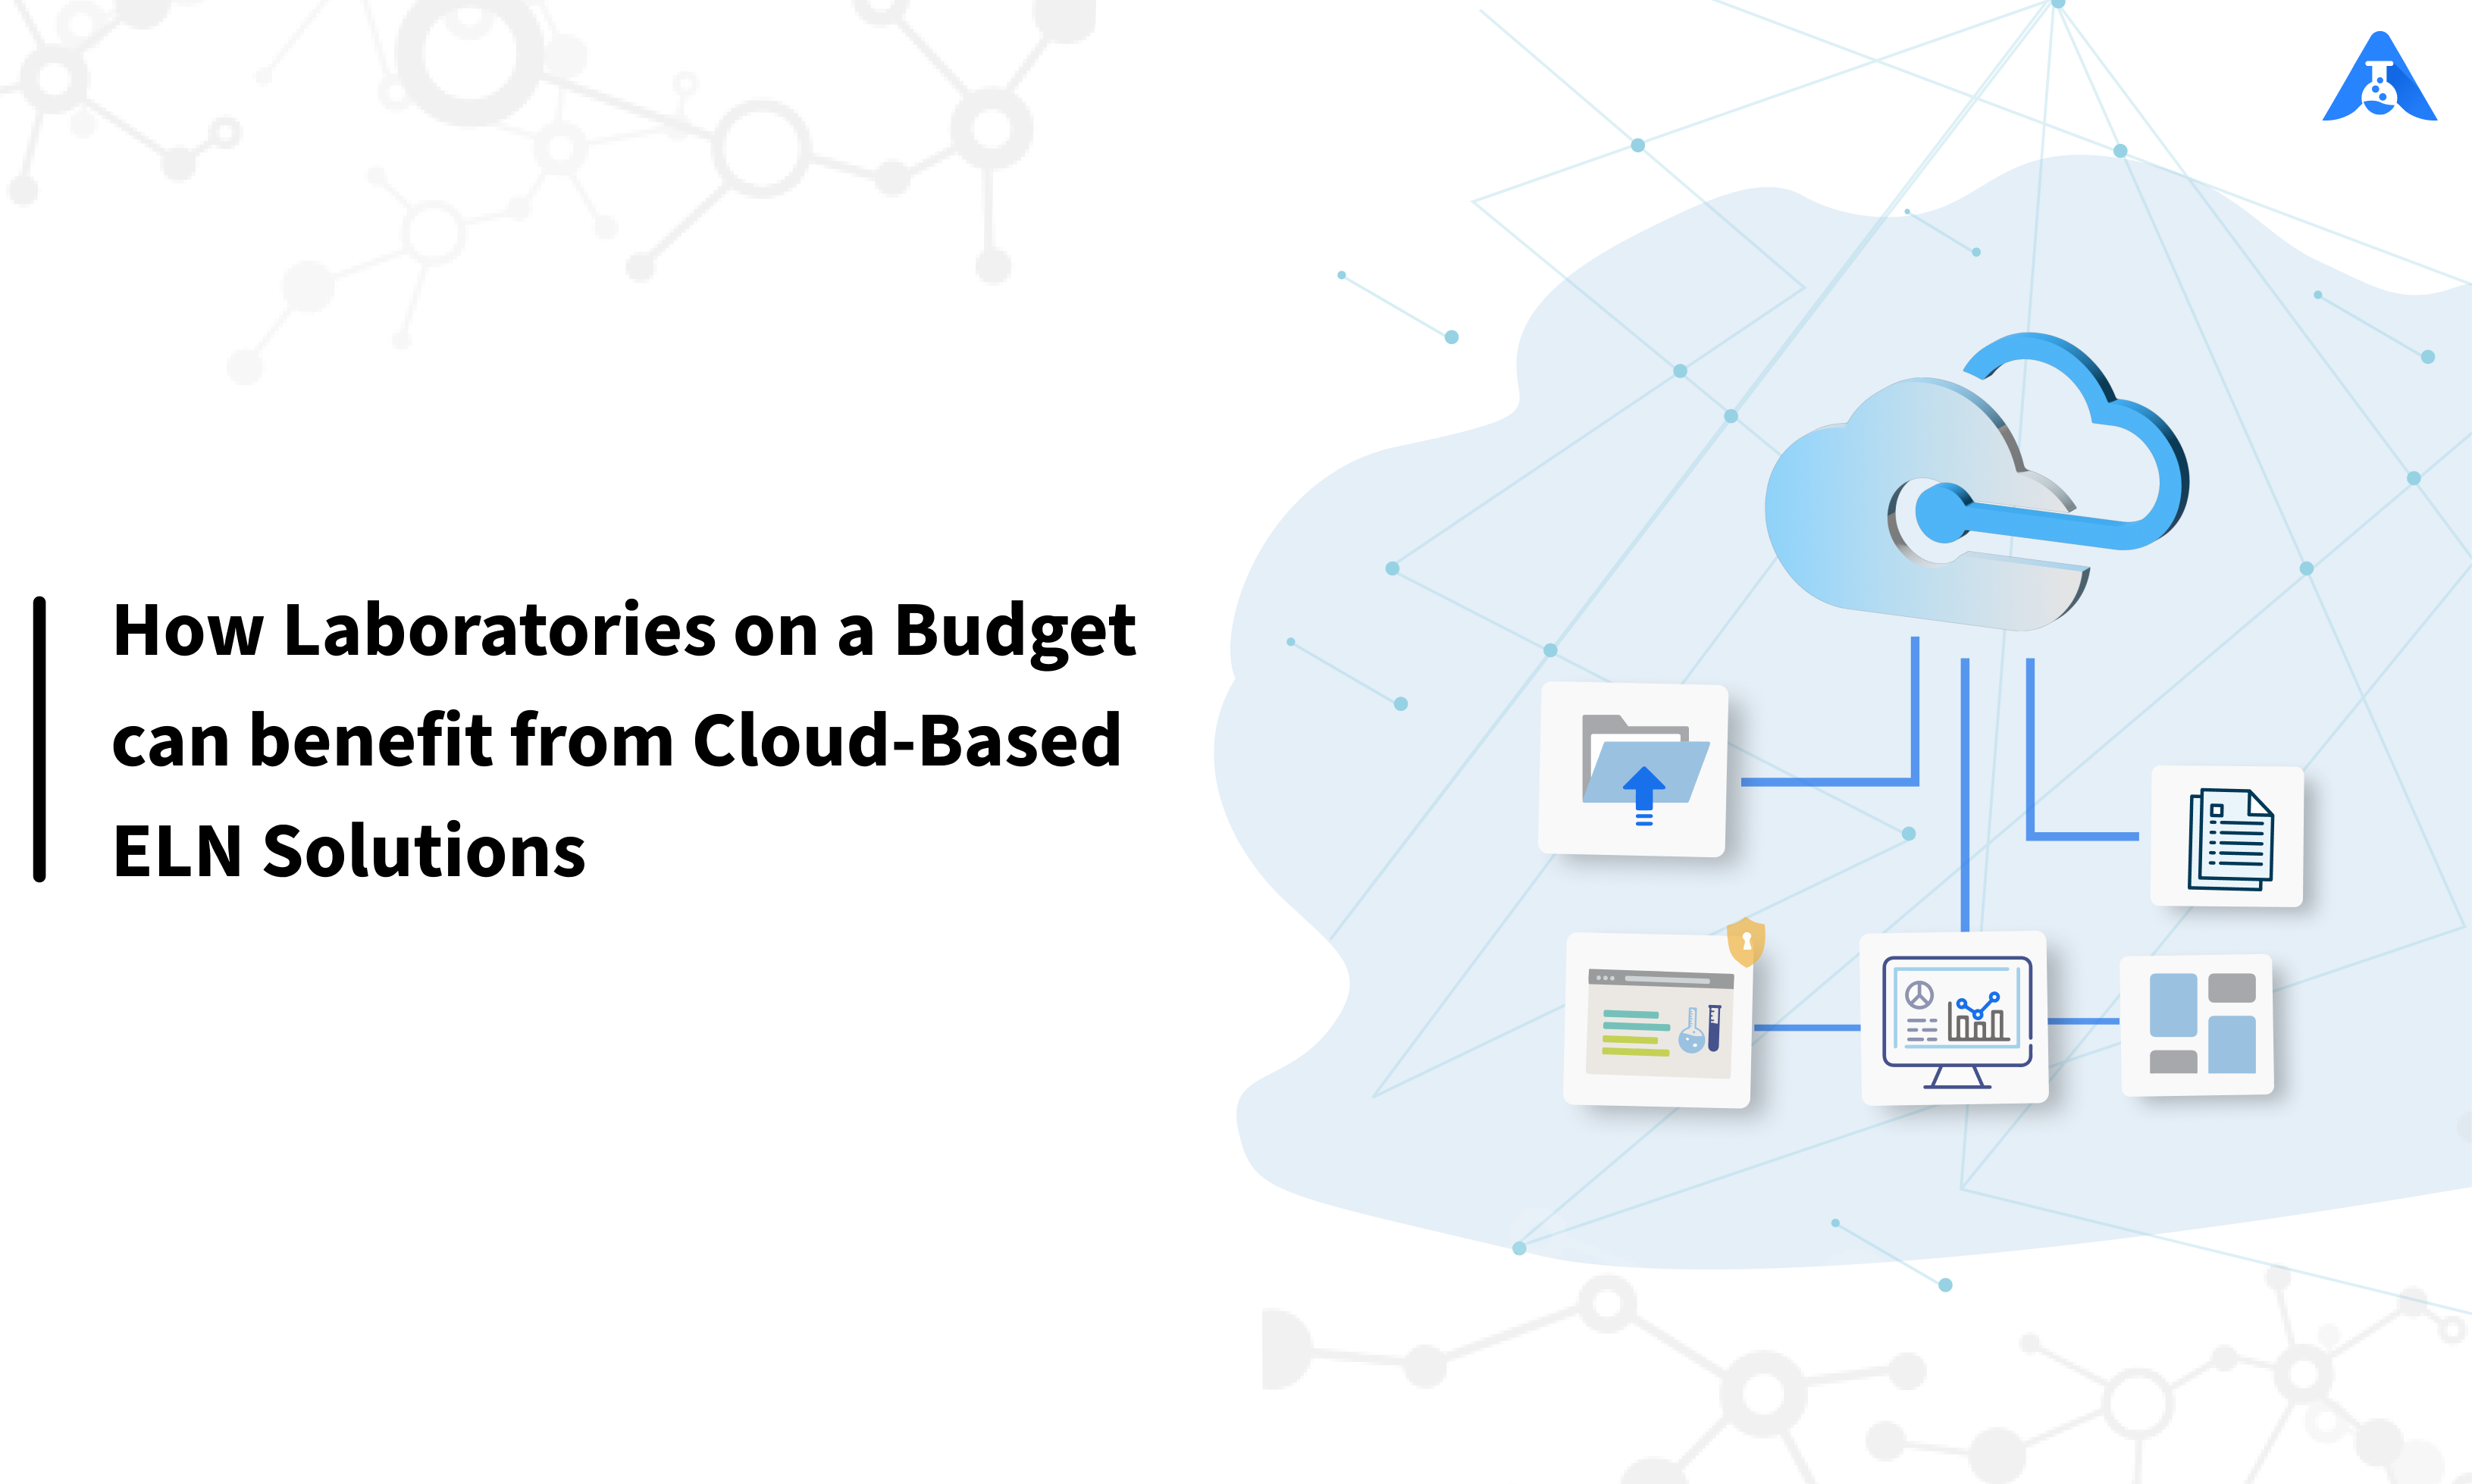 How Laboratories on a Budget can benefit from Cloud-Based ELN Solutions